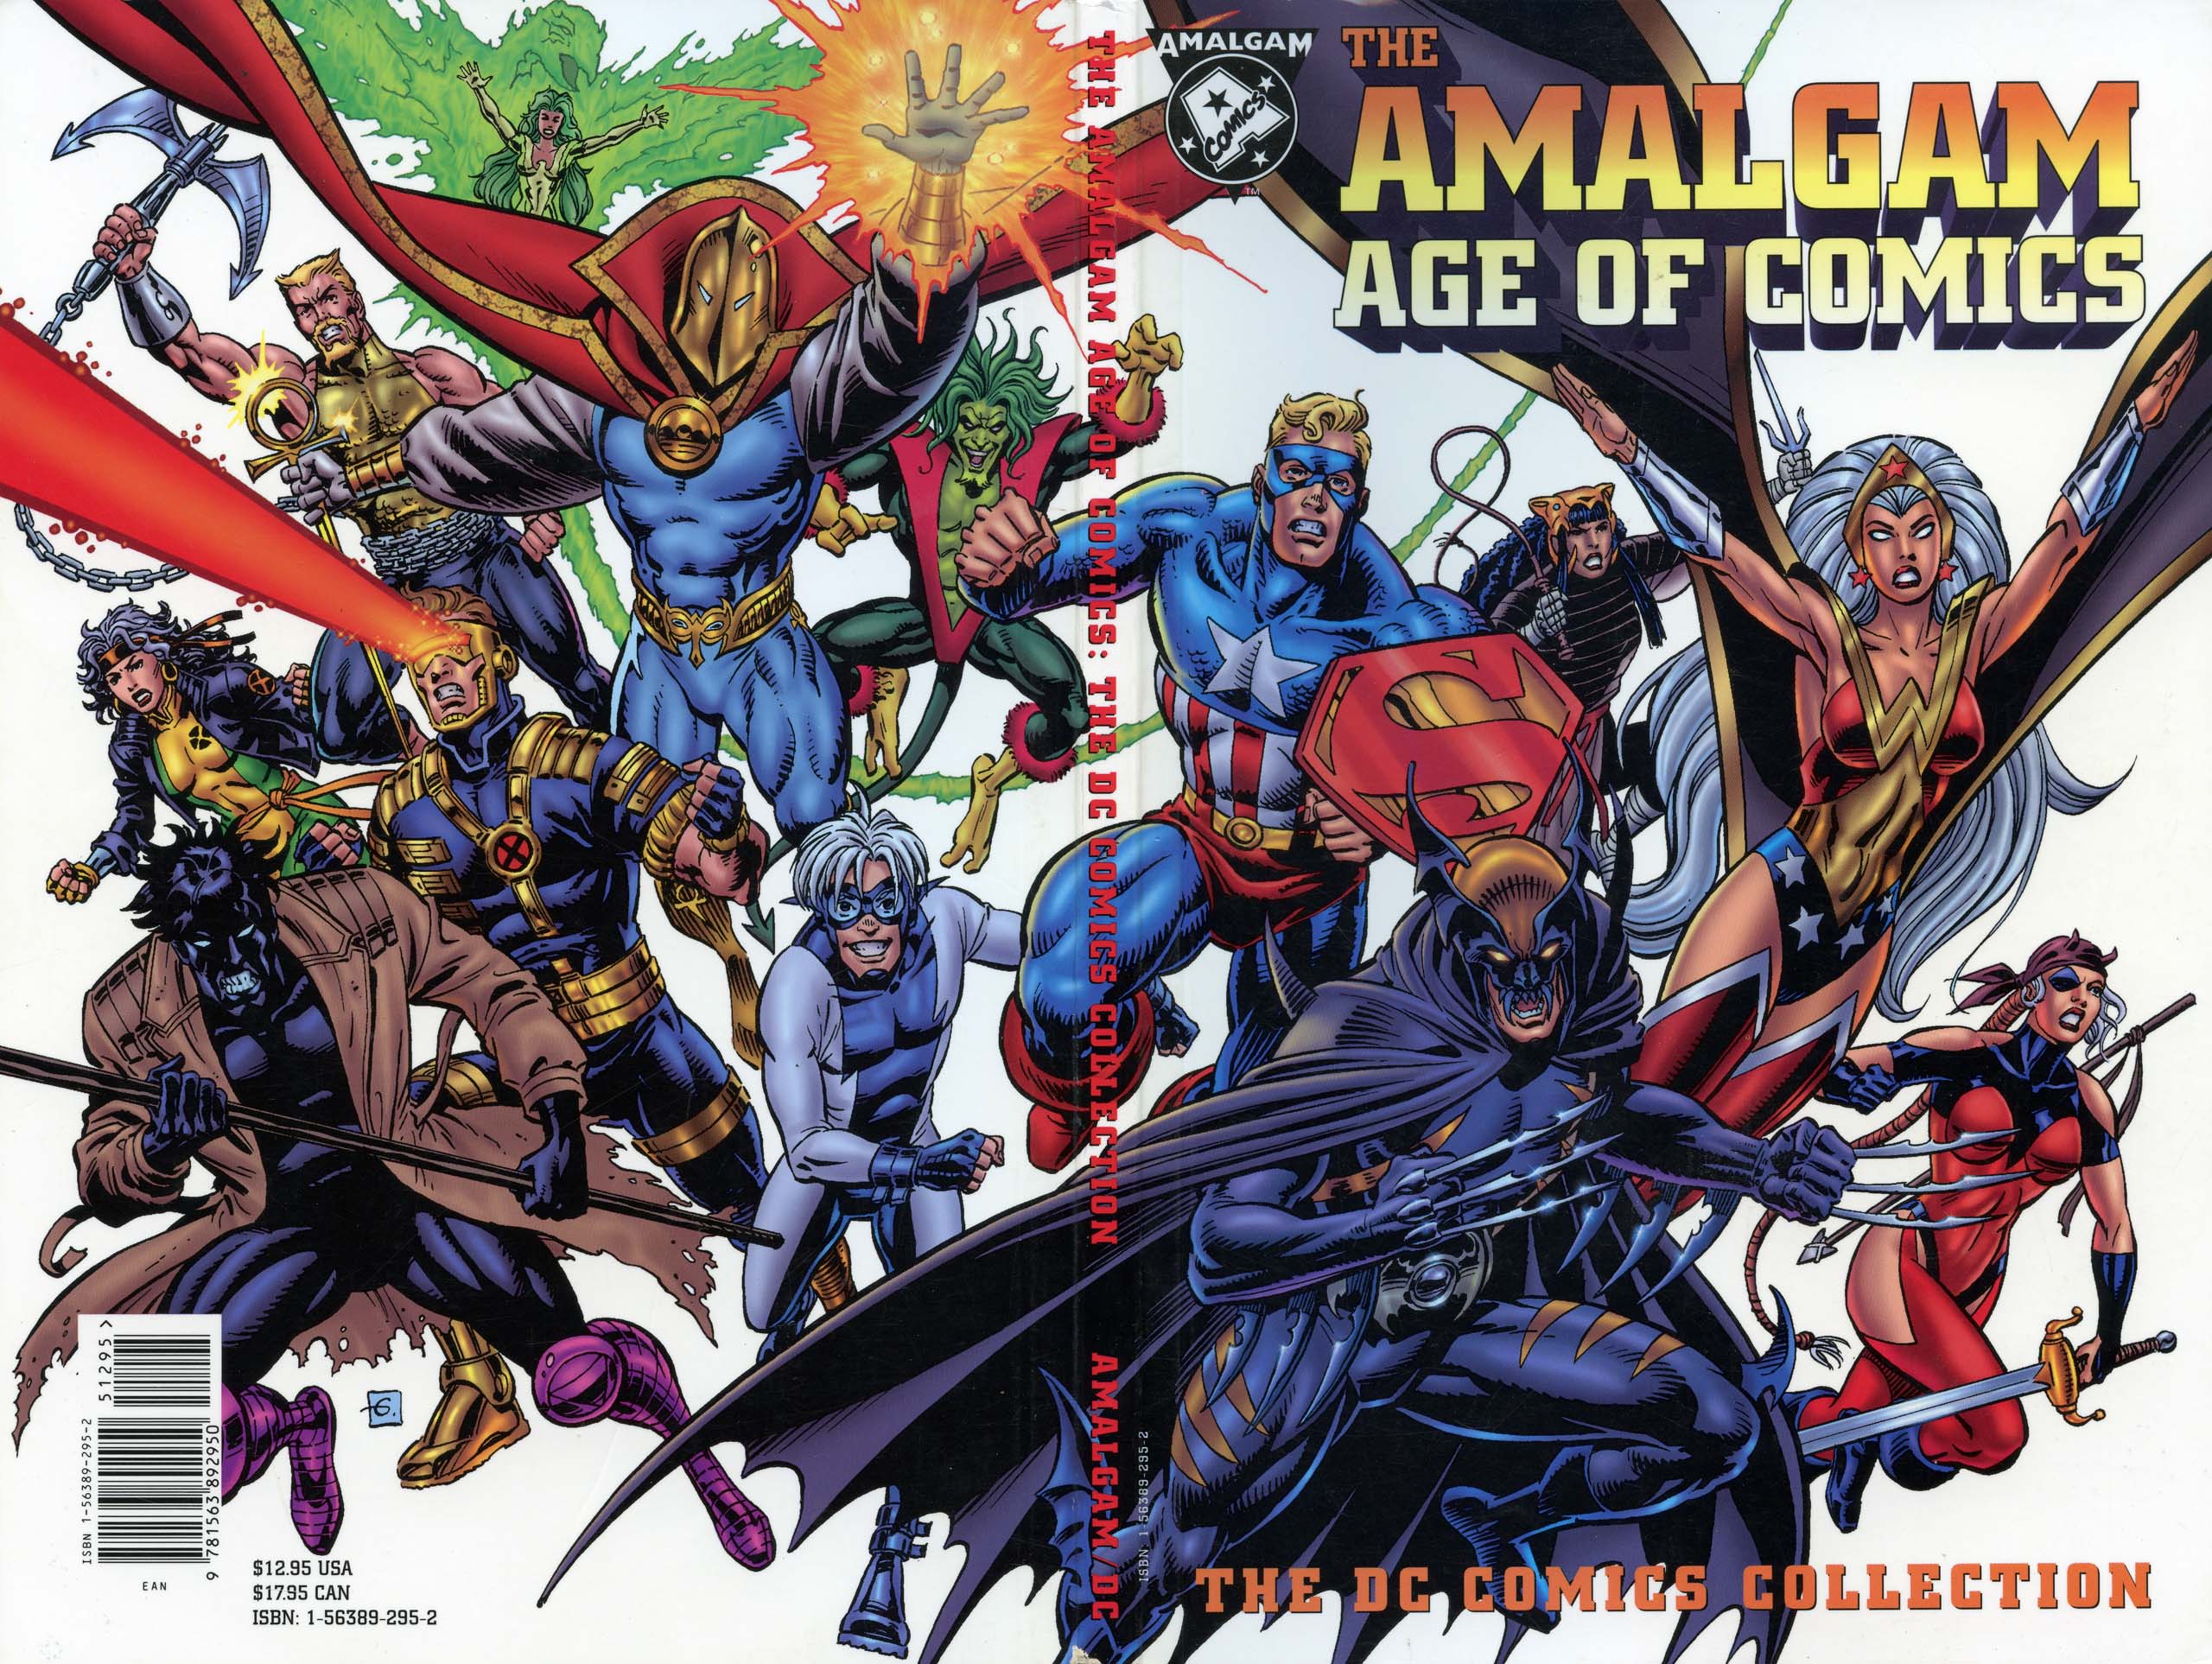 Read online The Amalgam Age of Comics: The DC Comics Collection comic -  Issue # TPB (Part 1) - 1